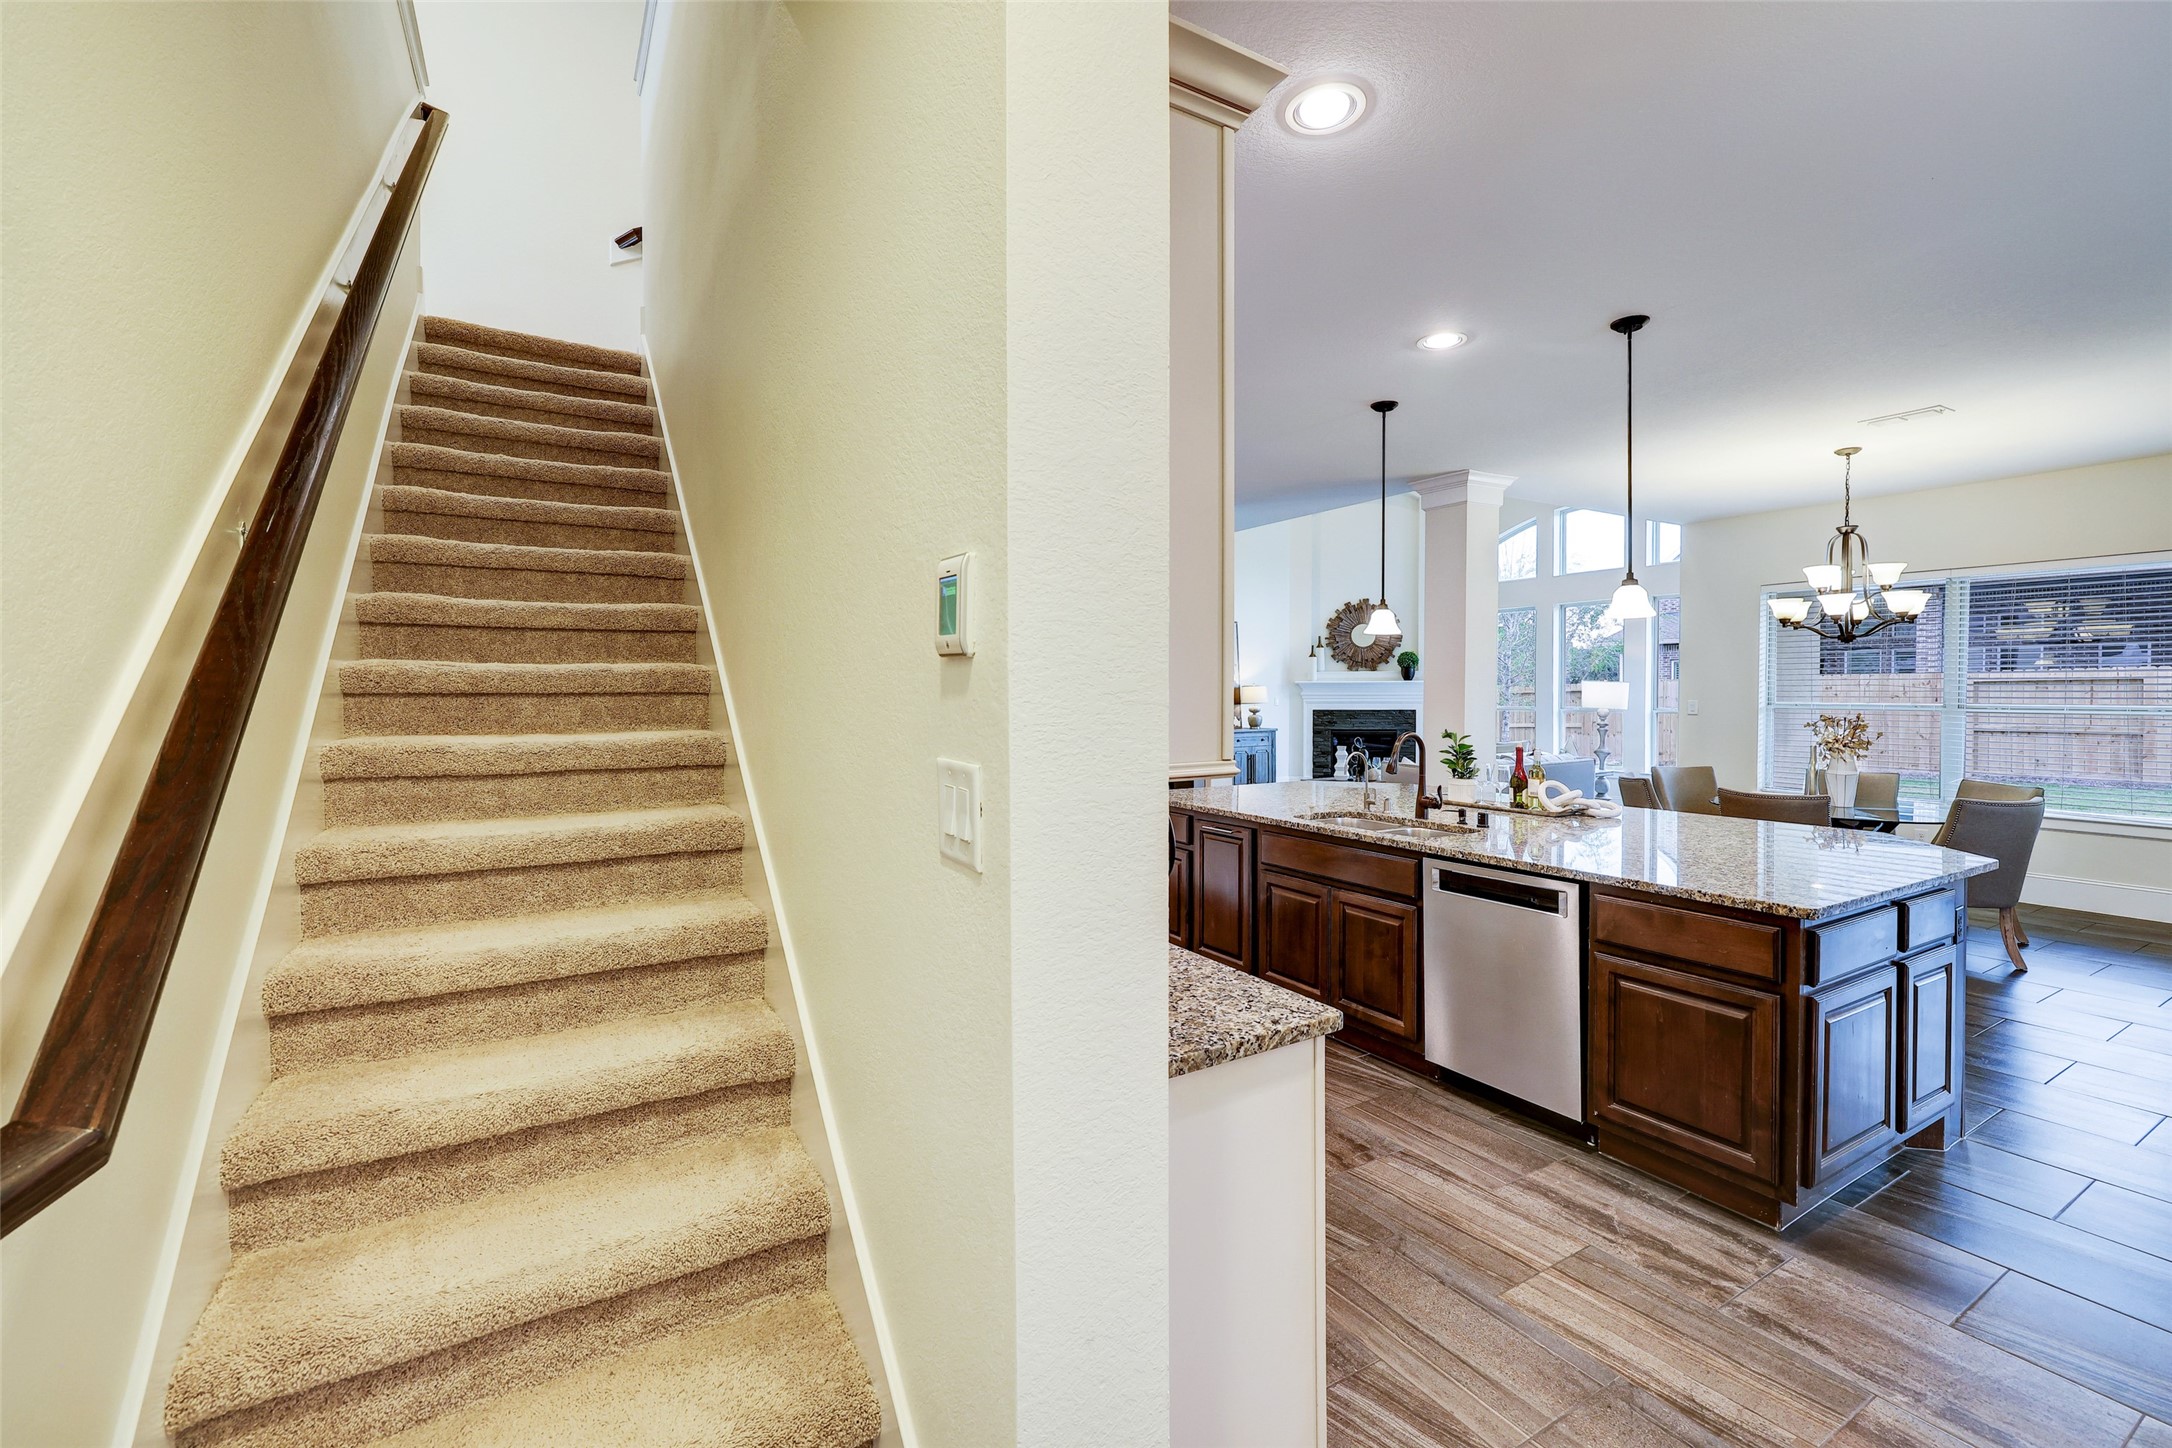 Tucked privately behind the kitchen is a second staircase for convenience and ease of access from the garage.